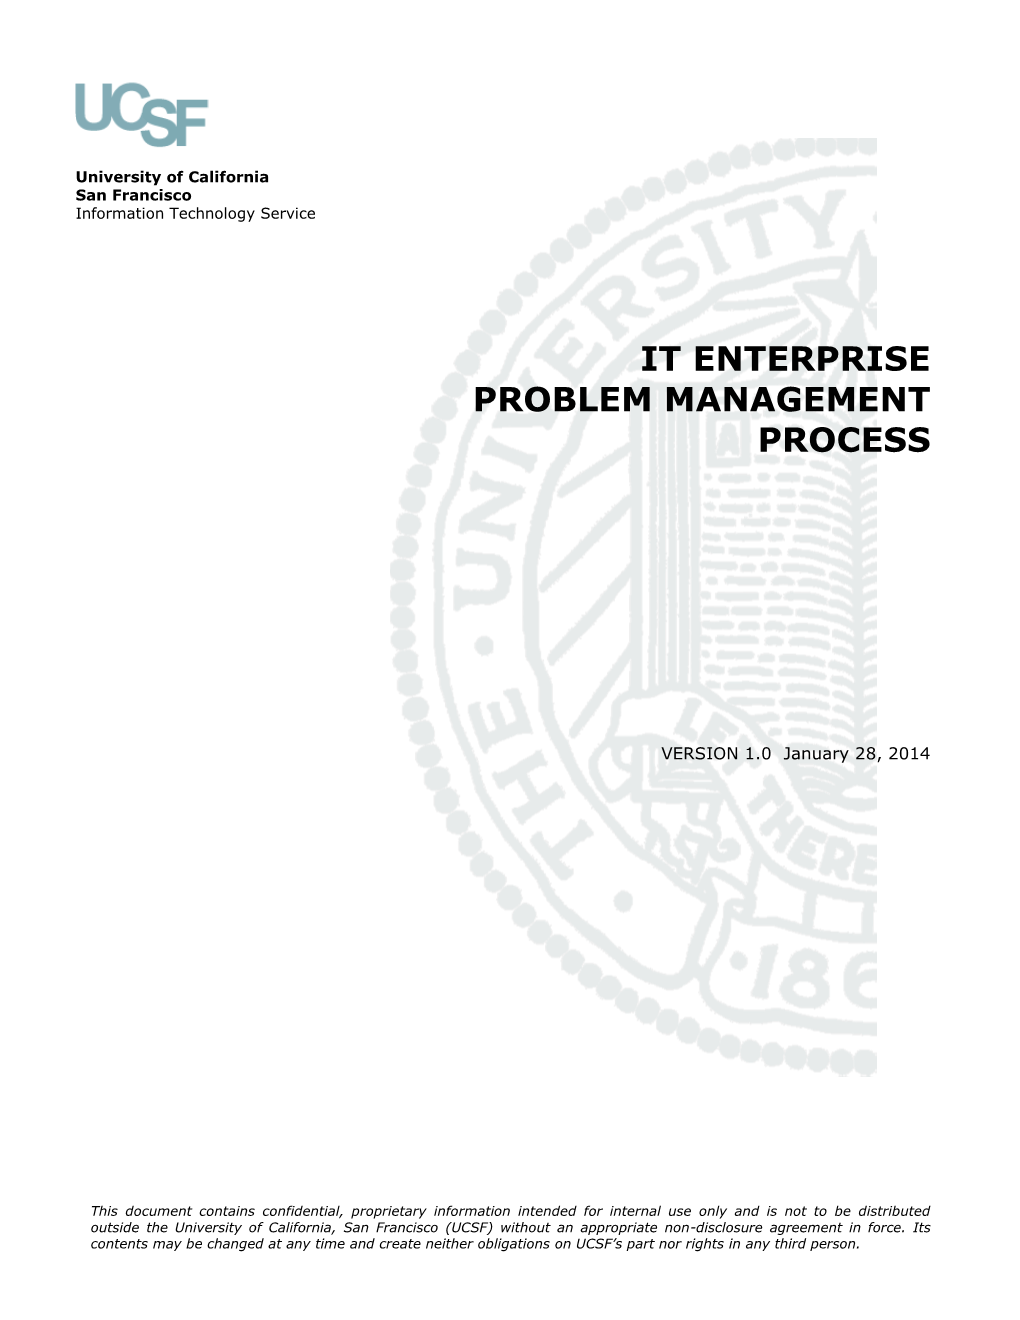 IT Enterprise Problem Management Process and Covers the Requirements of the Various Stakeholder Groups